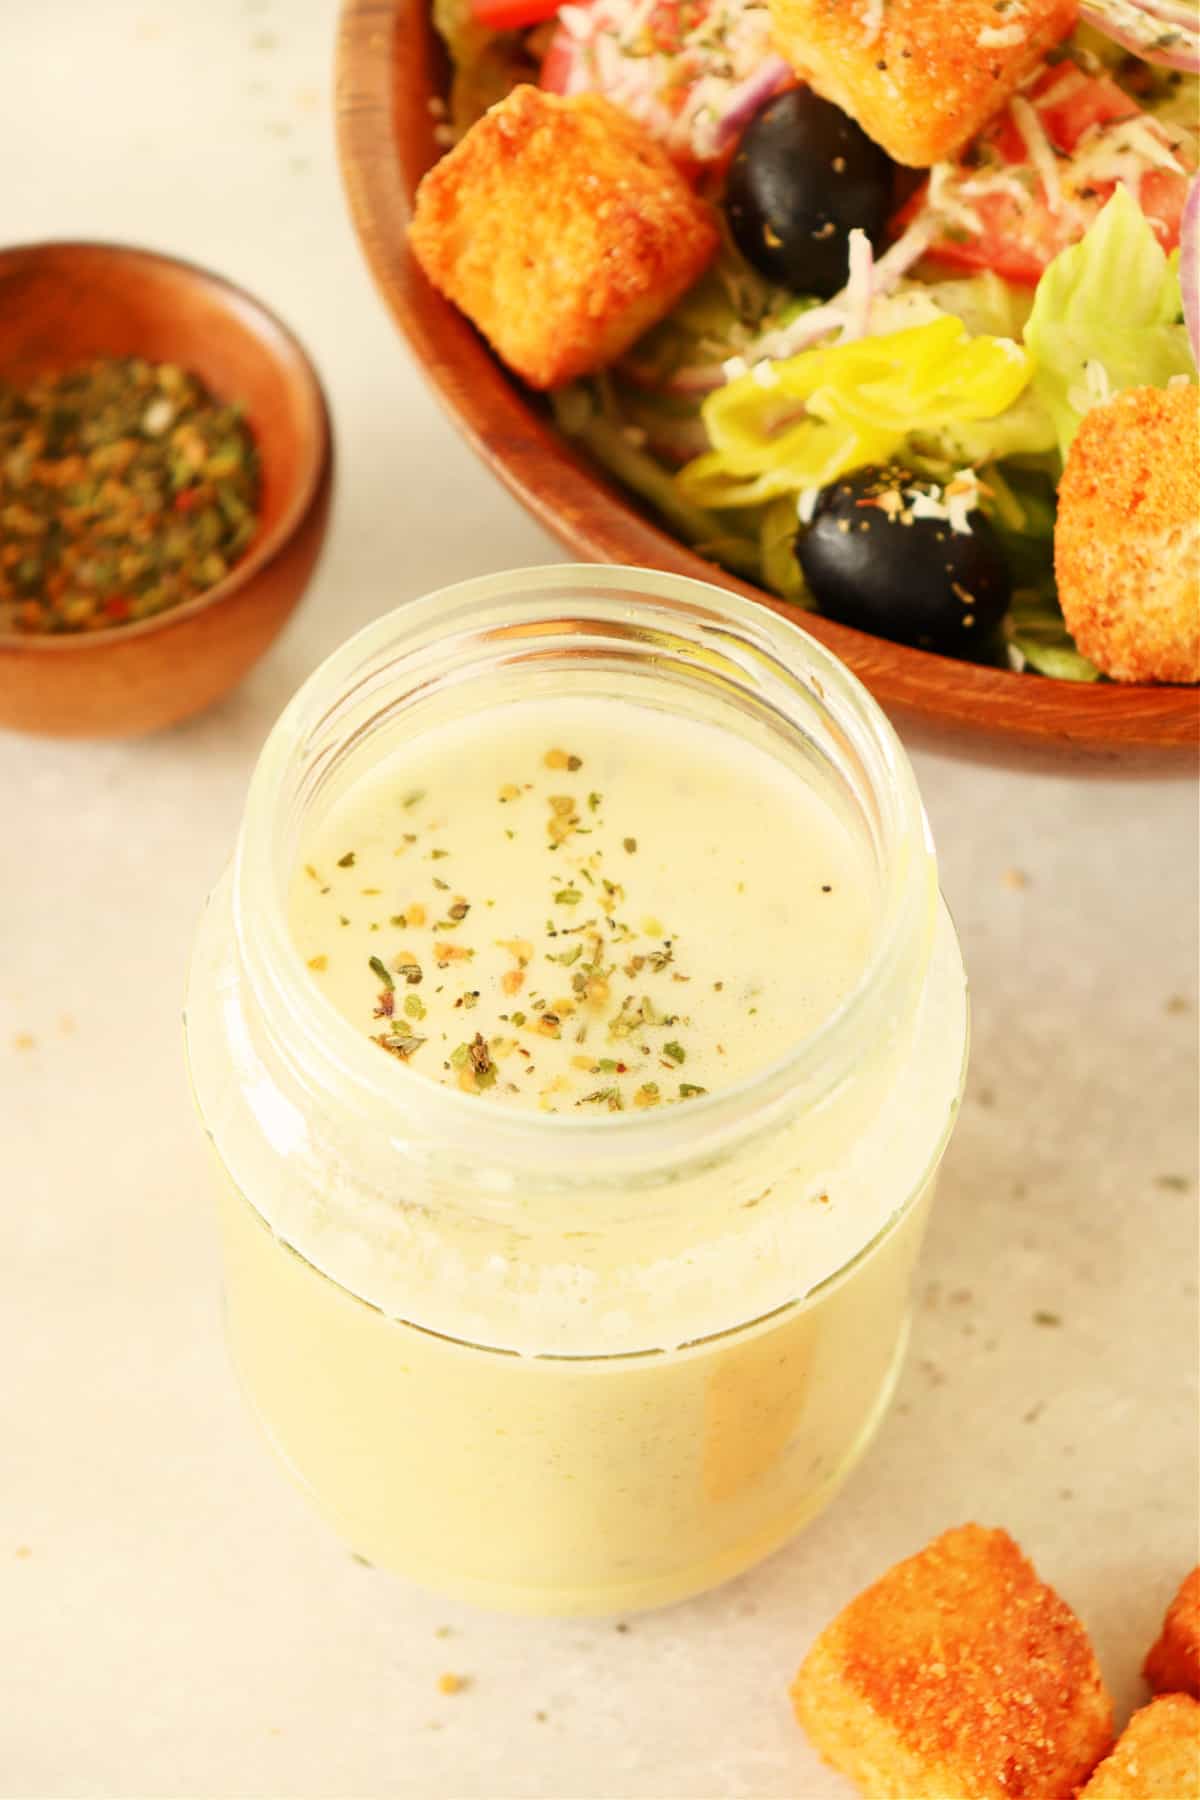 Creamy dressing in a glass jar next to a bowl with salad.